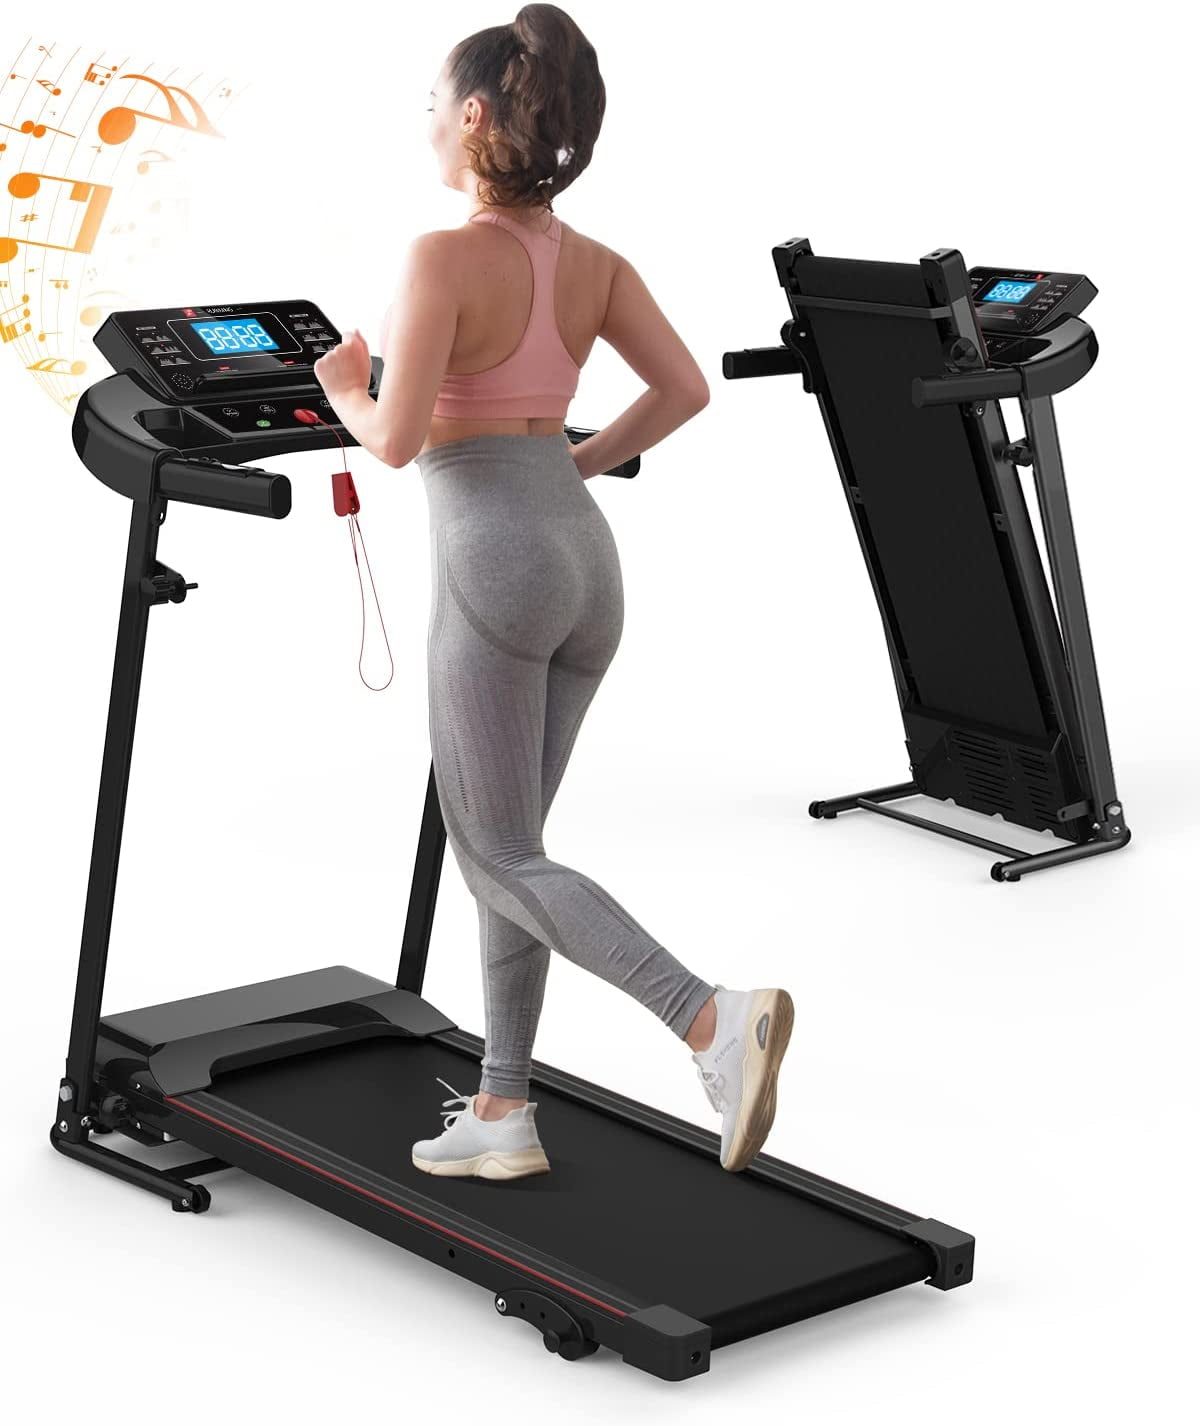 Folding Treadmill with Incline 2.5HP 12KM/H Electric Treadmill for Home Foldable, Bluetooth Music Cup Holder Heart Rate Sensor Walking Running Machine Indoor Home Gym Exercise Fitness -